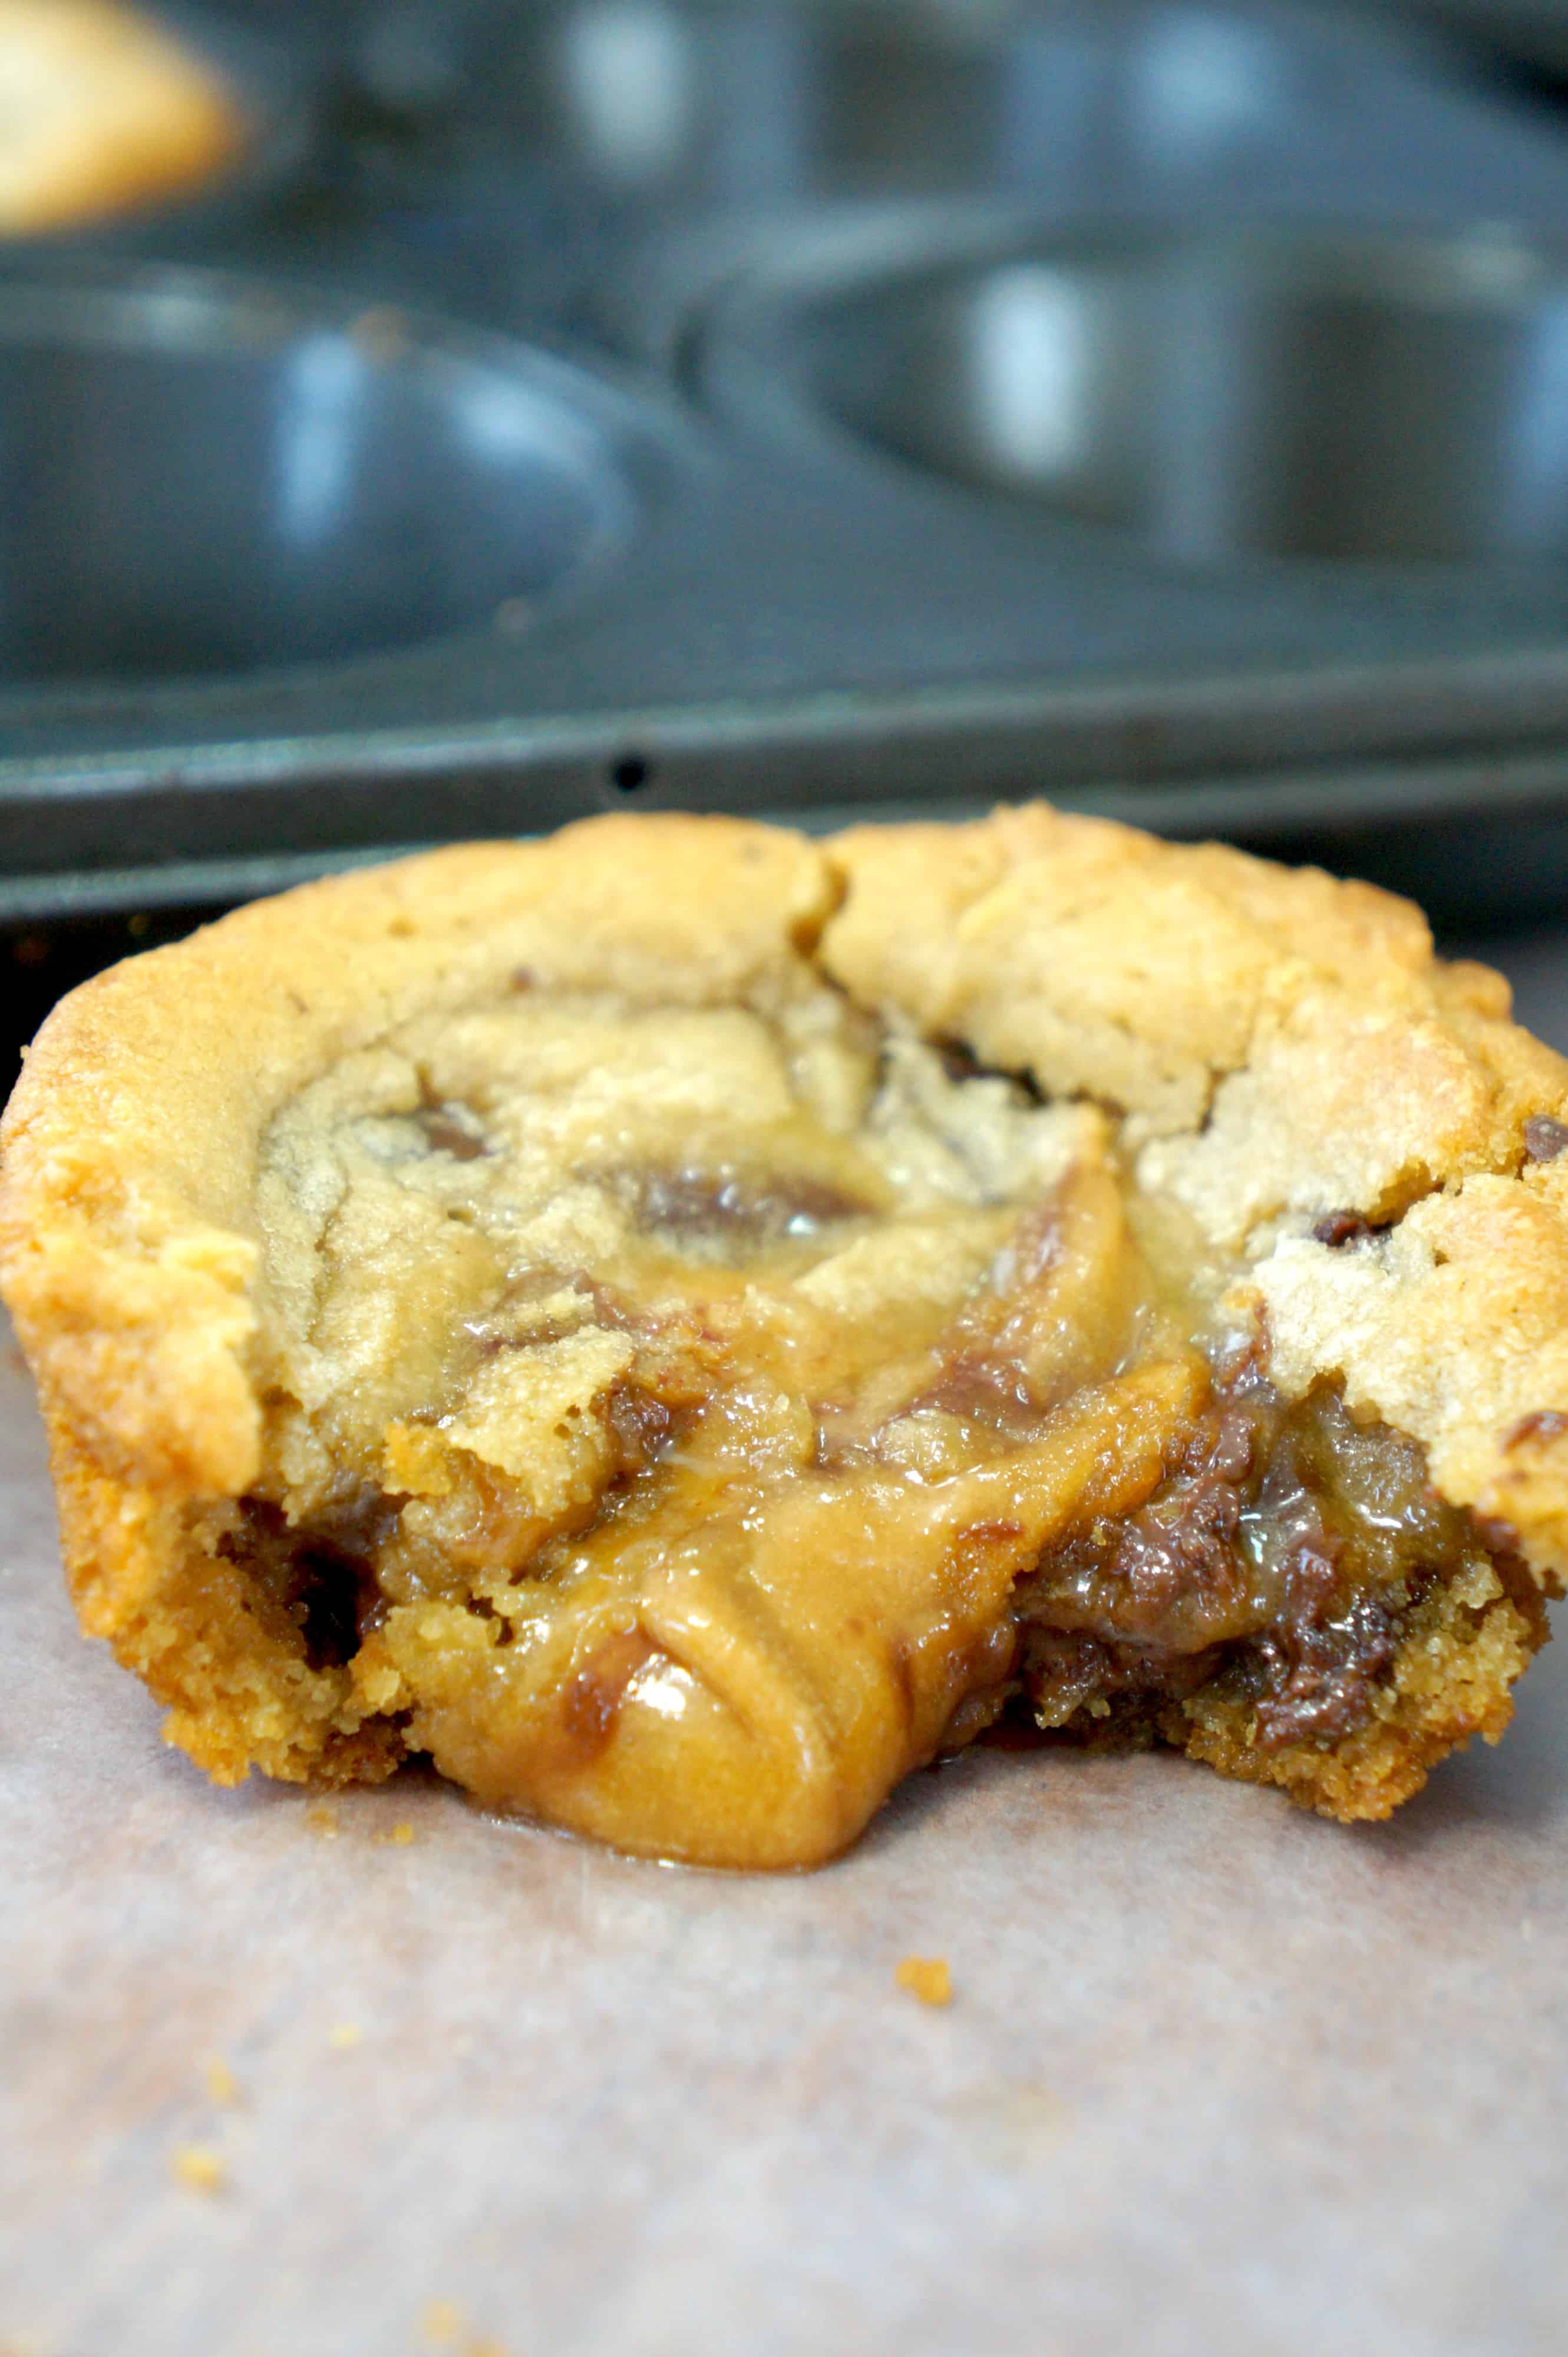 Chocolate Chip Cookies stuffed with Caramel and Chocolate Cream Cheese. Easy dessert recipe using Pillsbury chocolate chip cookie dough. Chocolate chip cookie cups made in muffin tins are an easy cream cheese dessert recipe.